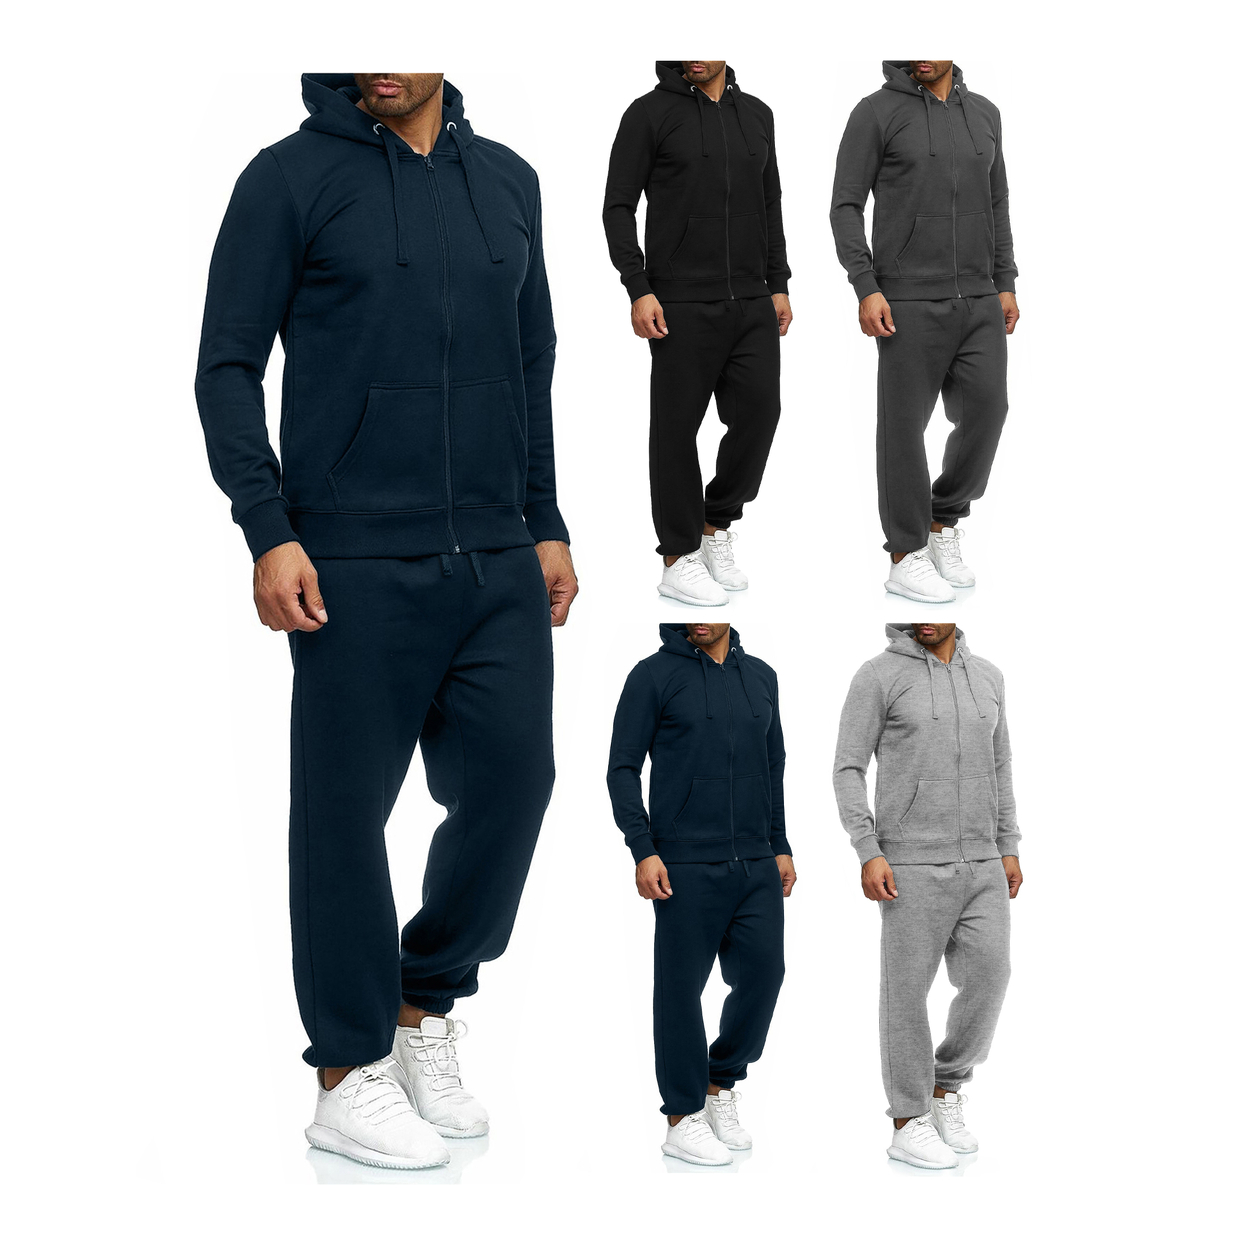 Men's Casual Big & Tall Athletic Active Winter Warm Fleece Lined Full Zip Tracksuit Jogger Set - Black, Large